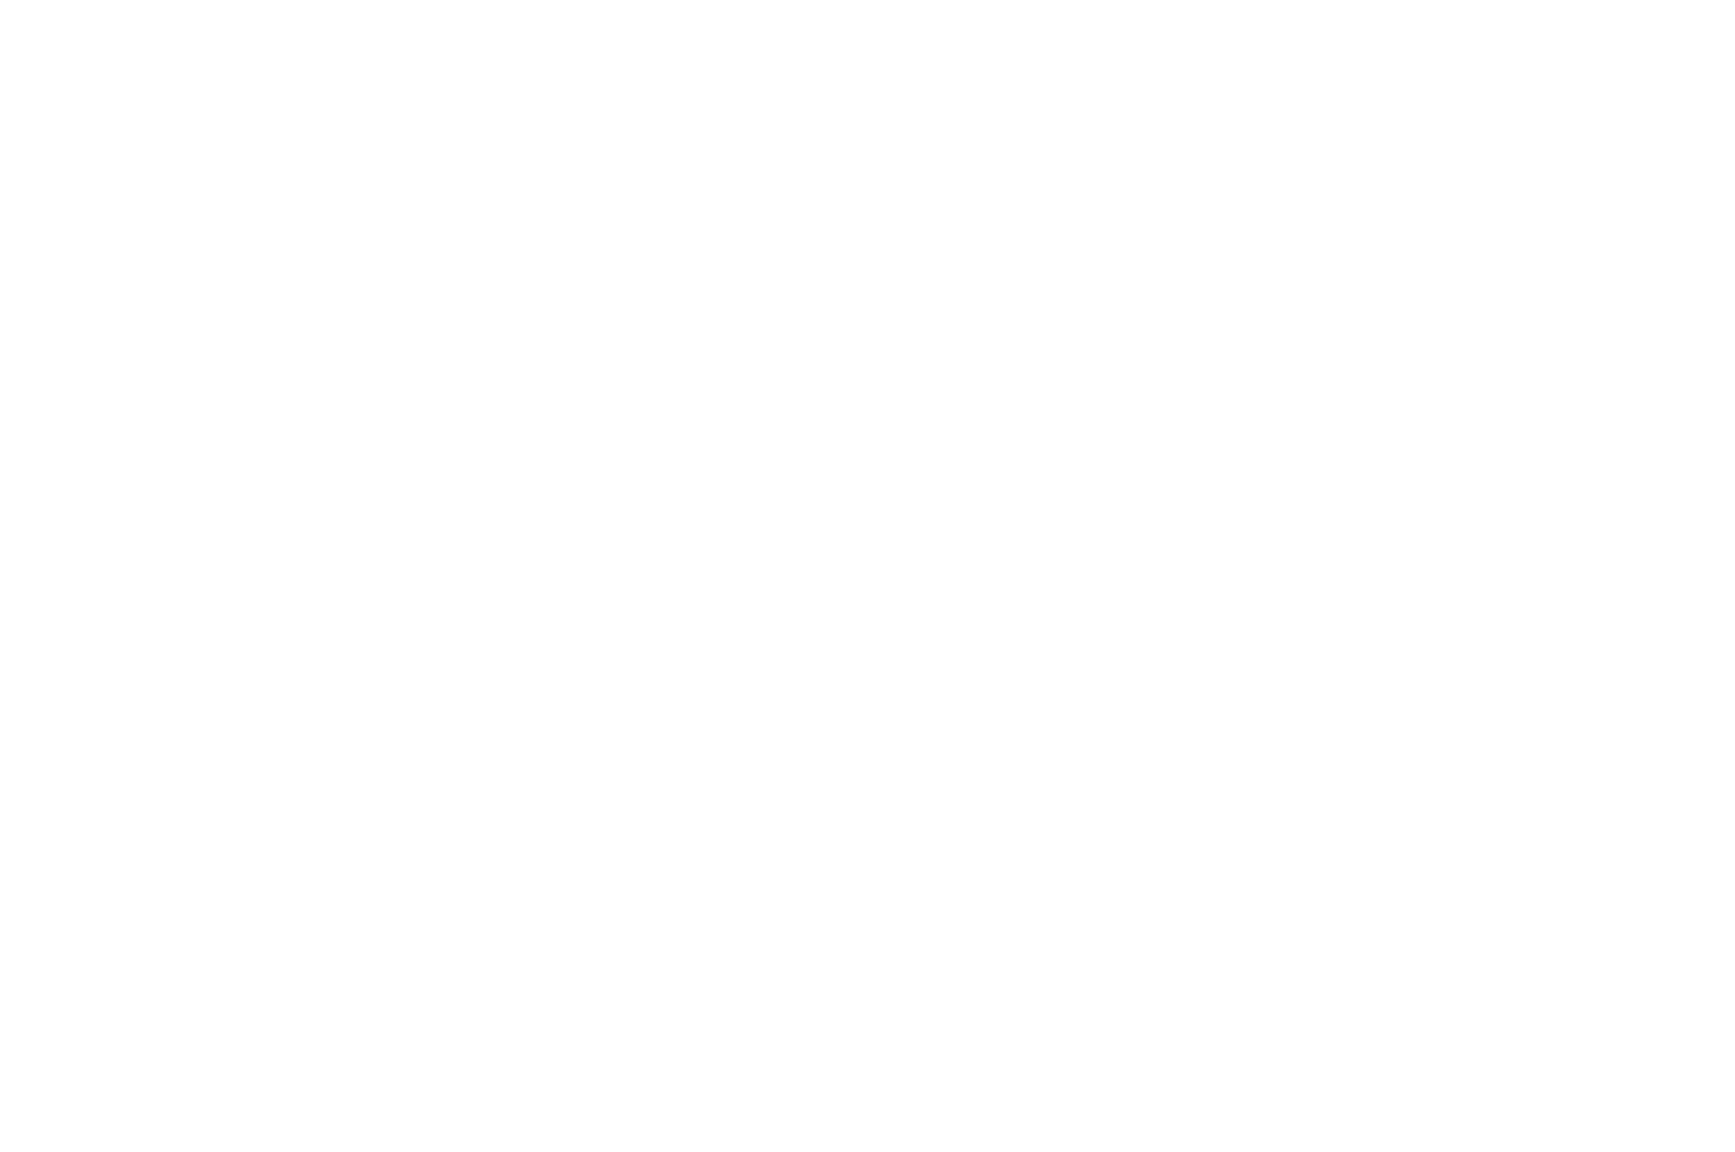 BEST MUSIC VIDEO 2022 - BERLIN INDIE FILM FESTIVAL - ONEFIFTY - XTC